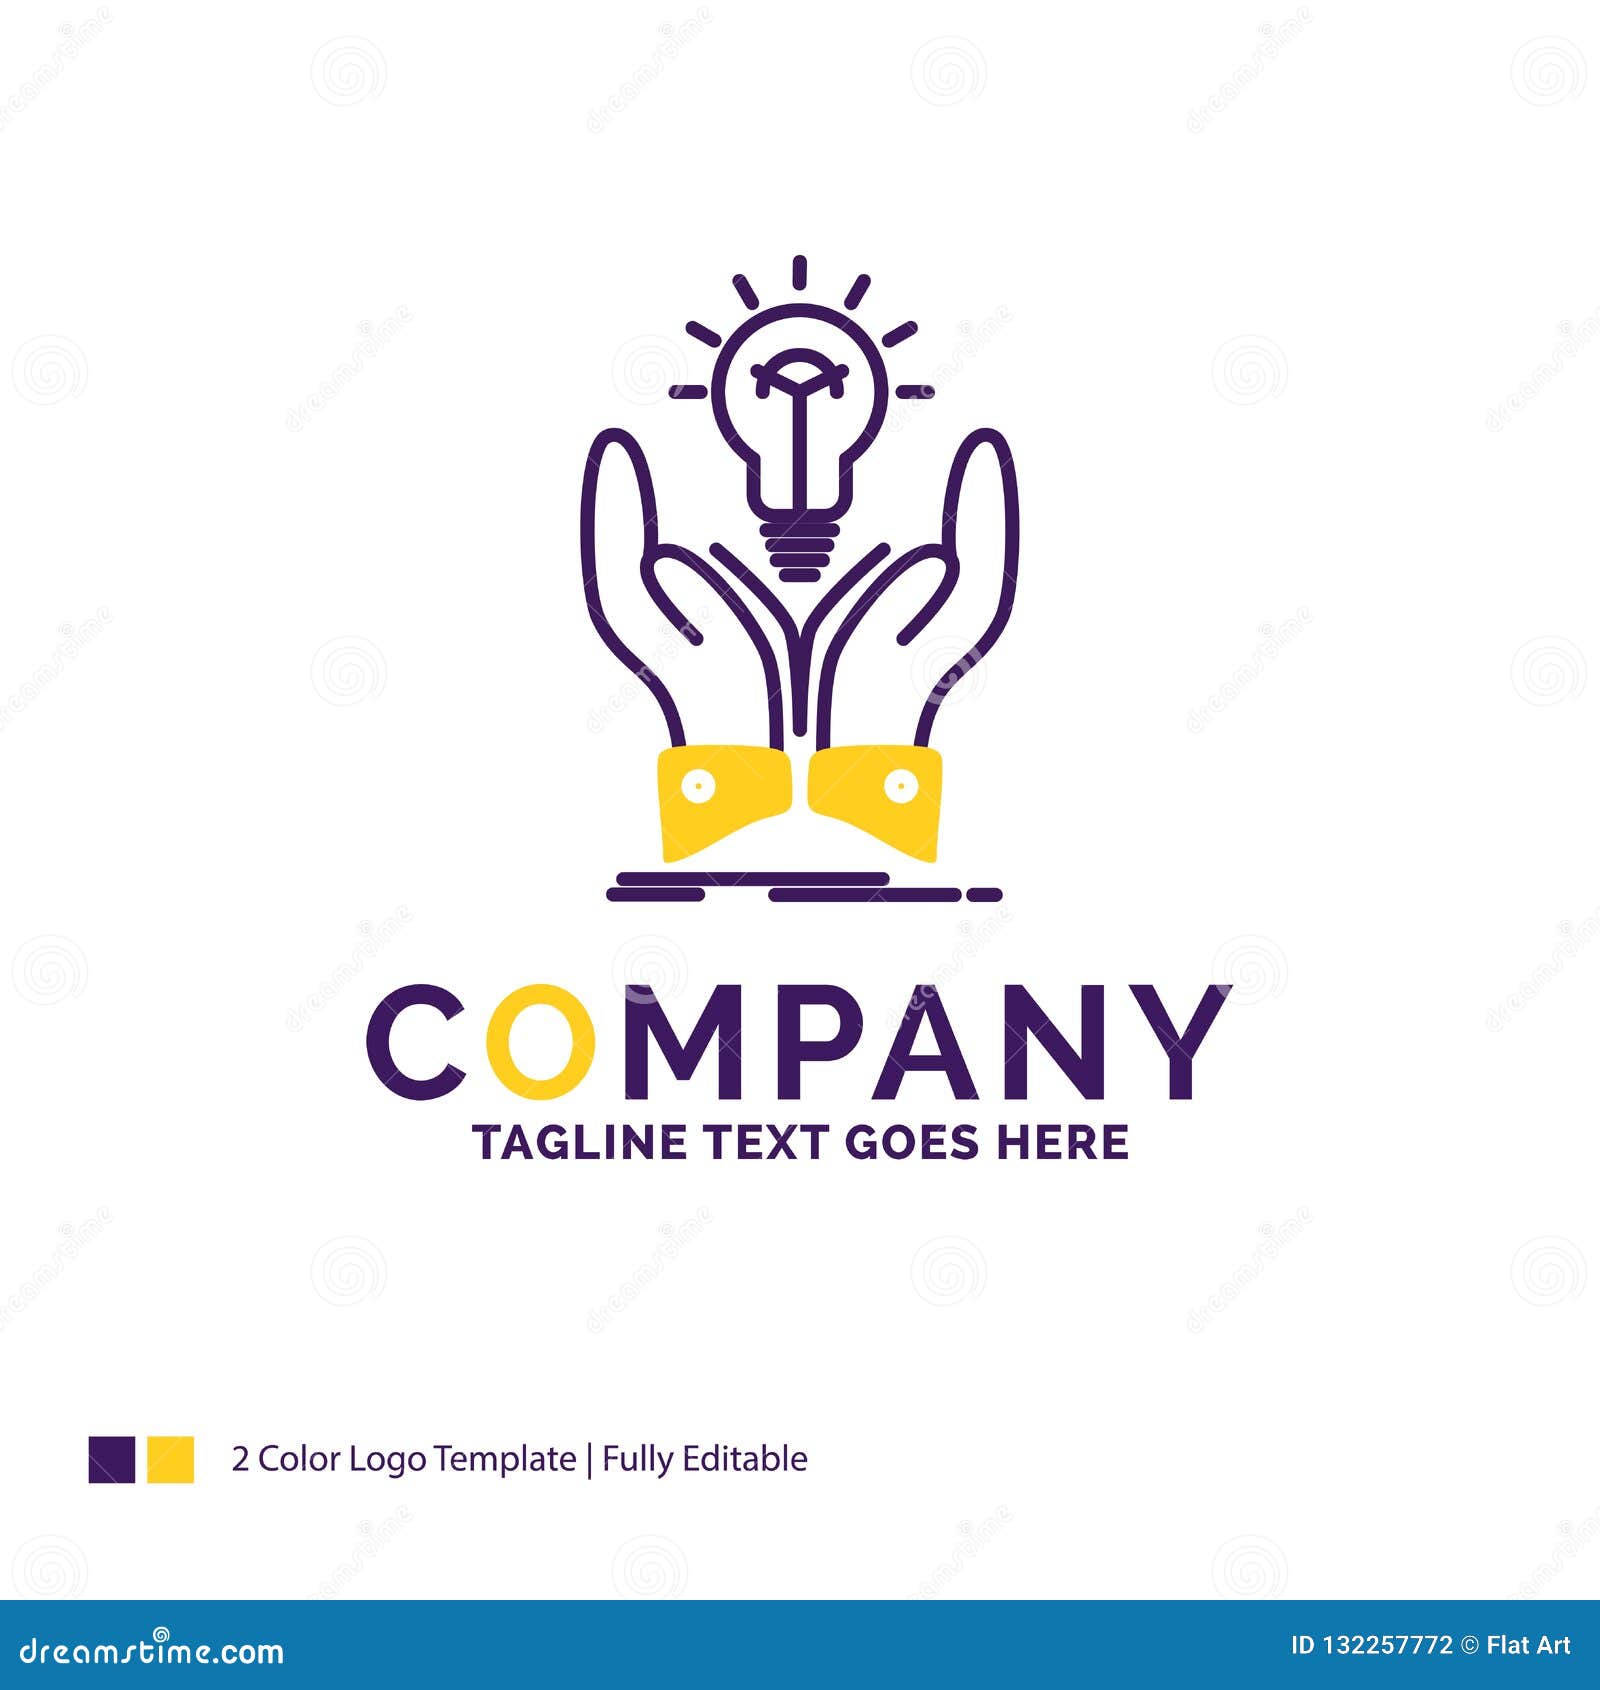 Company Name Logo Design For Idea Ideas Creative Share Hands Stock Vector Illustration Of Office Solution